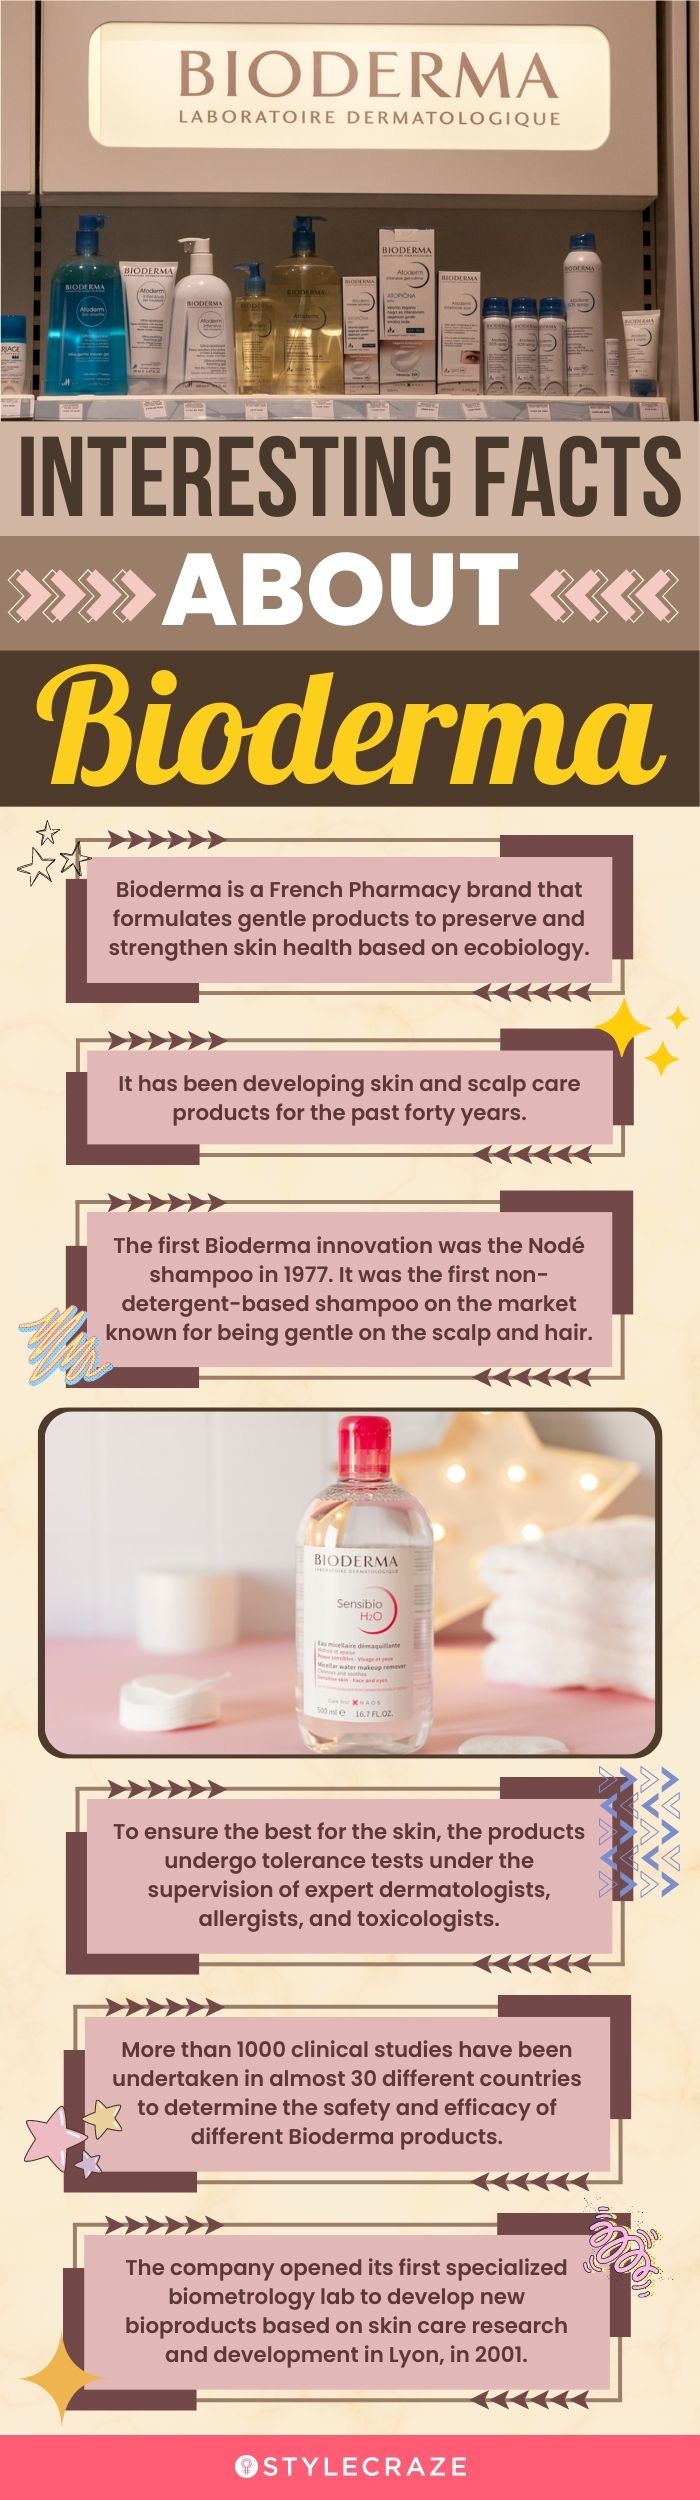 Interesting Facts About Bioderma (infographic)